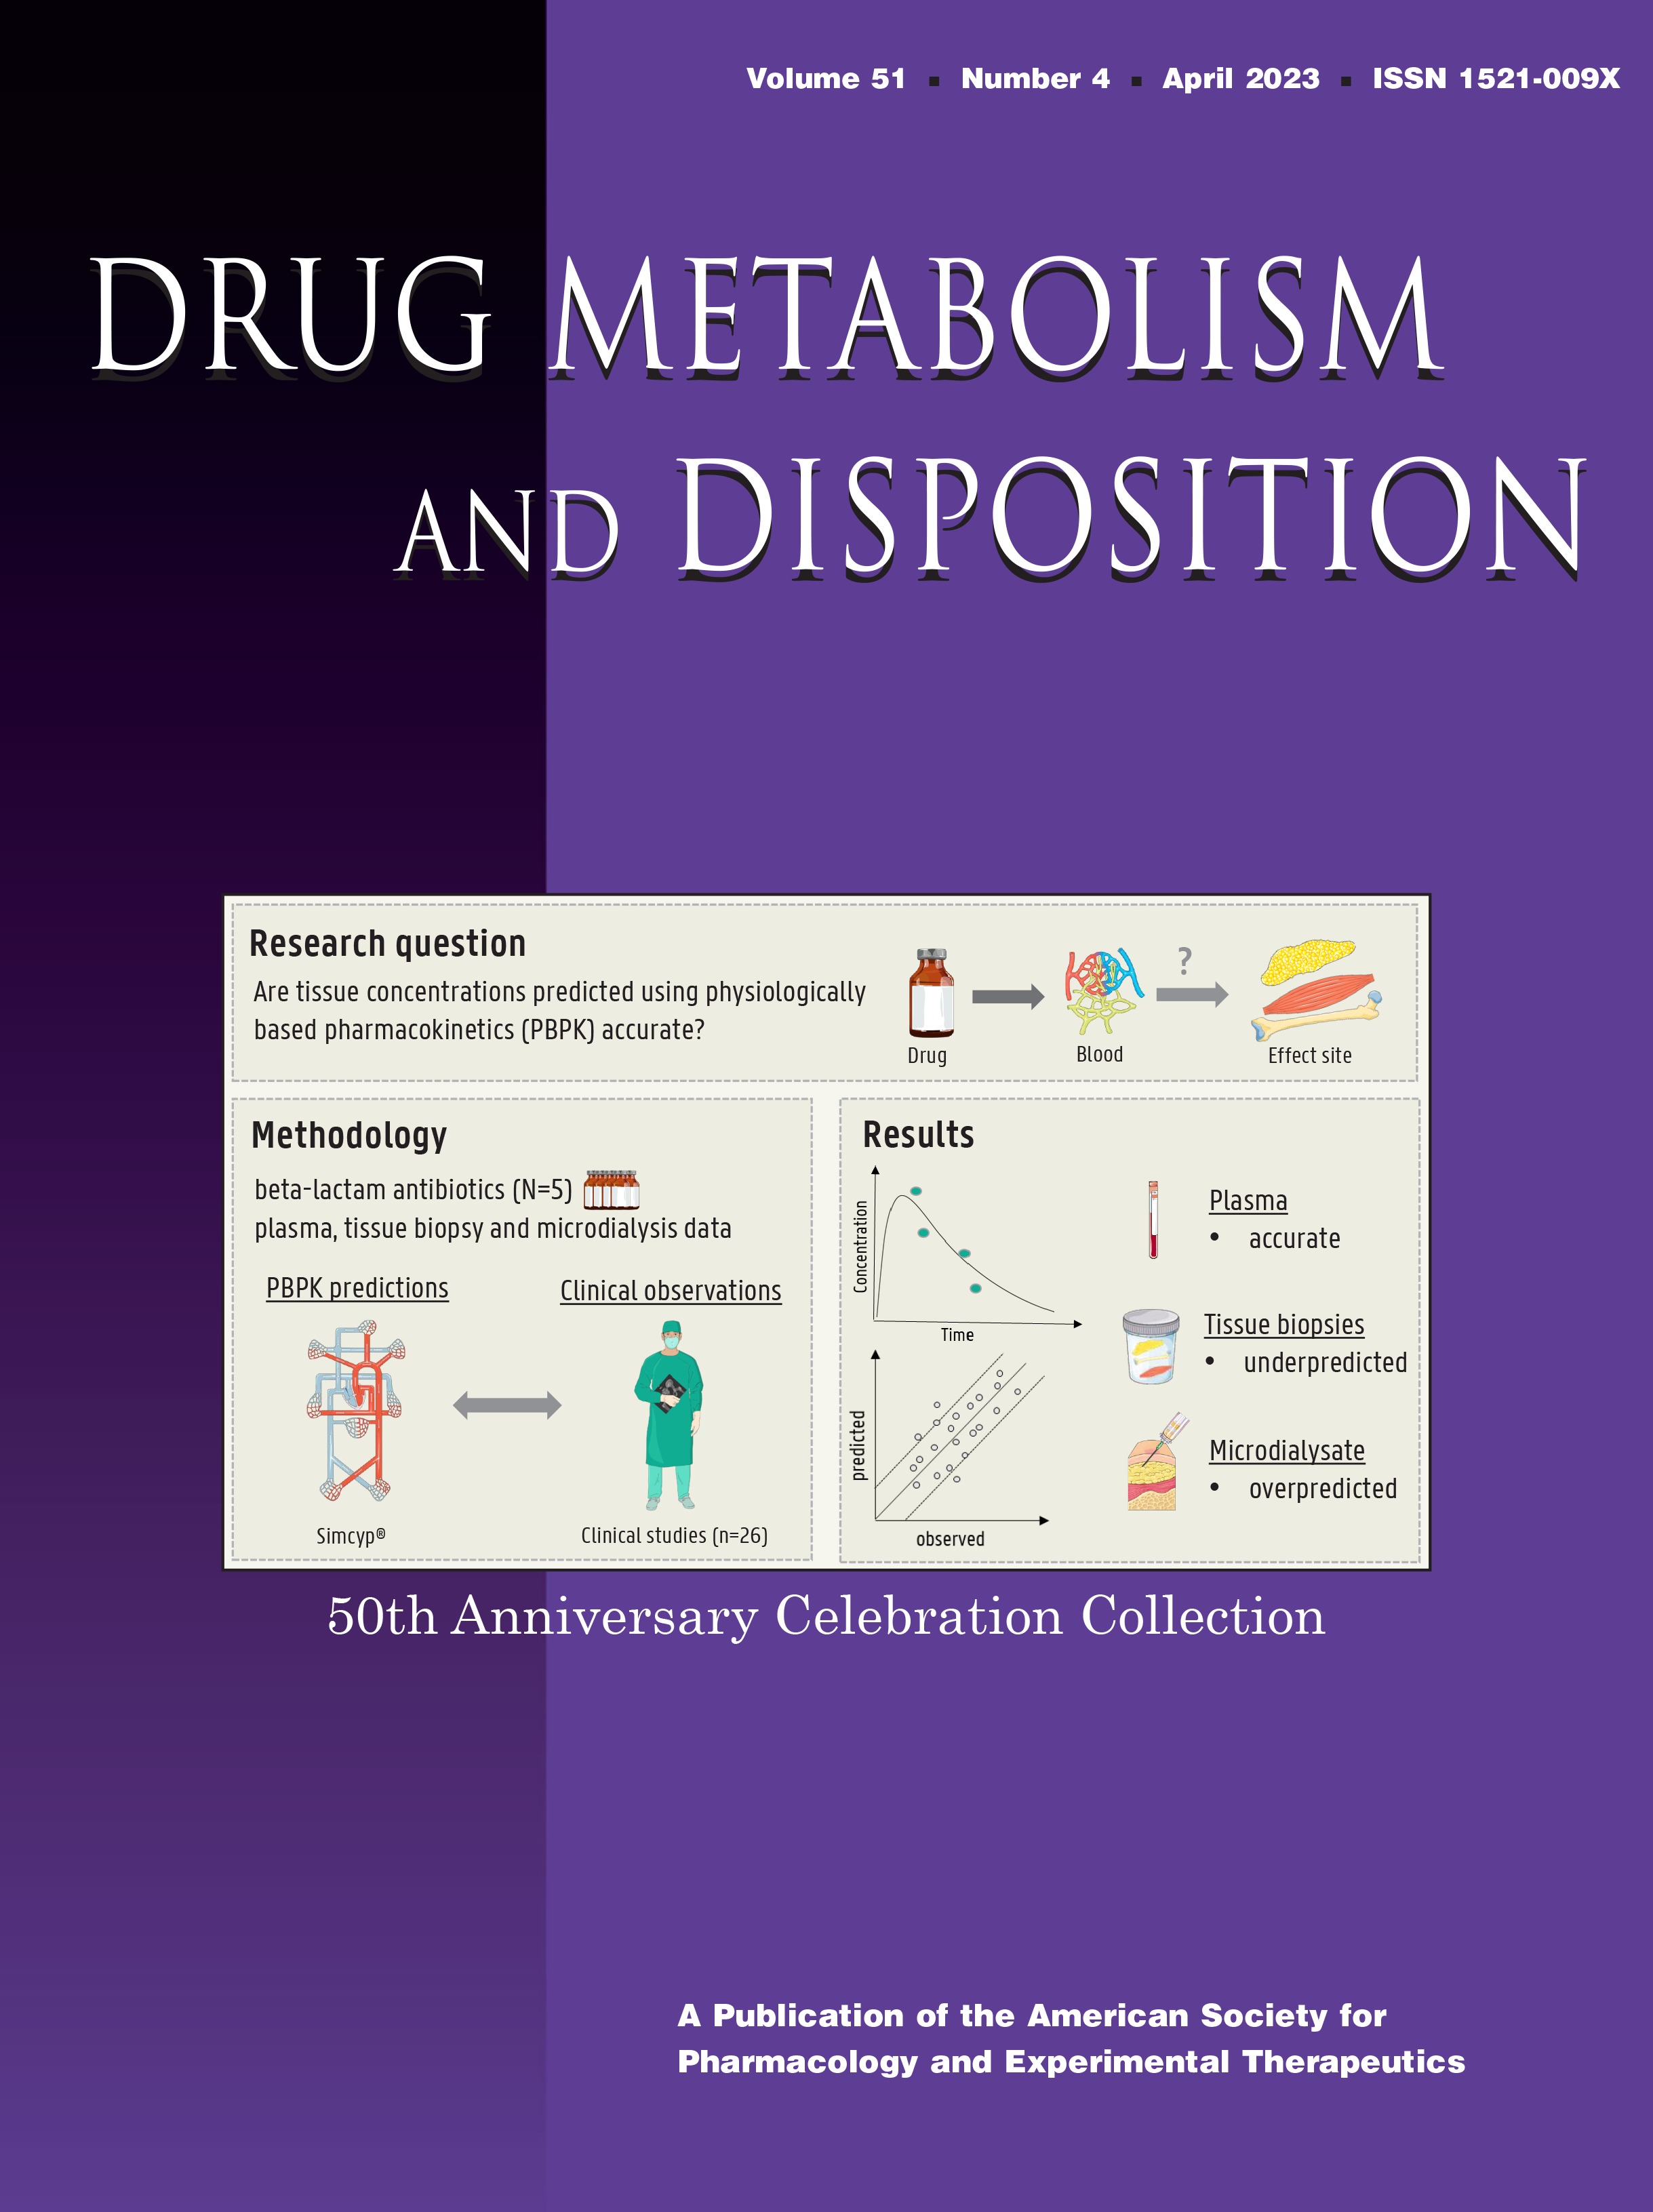 Unusual Biotransformation Reactions of Drugs and Drug Candidates [50th Anniversary Celebration Collection-Minireview]